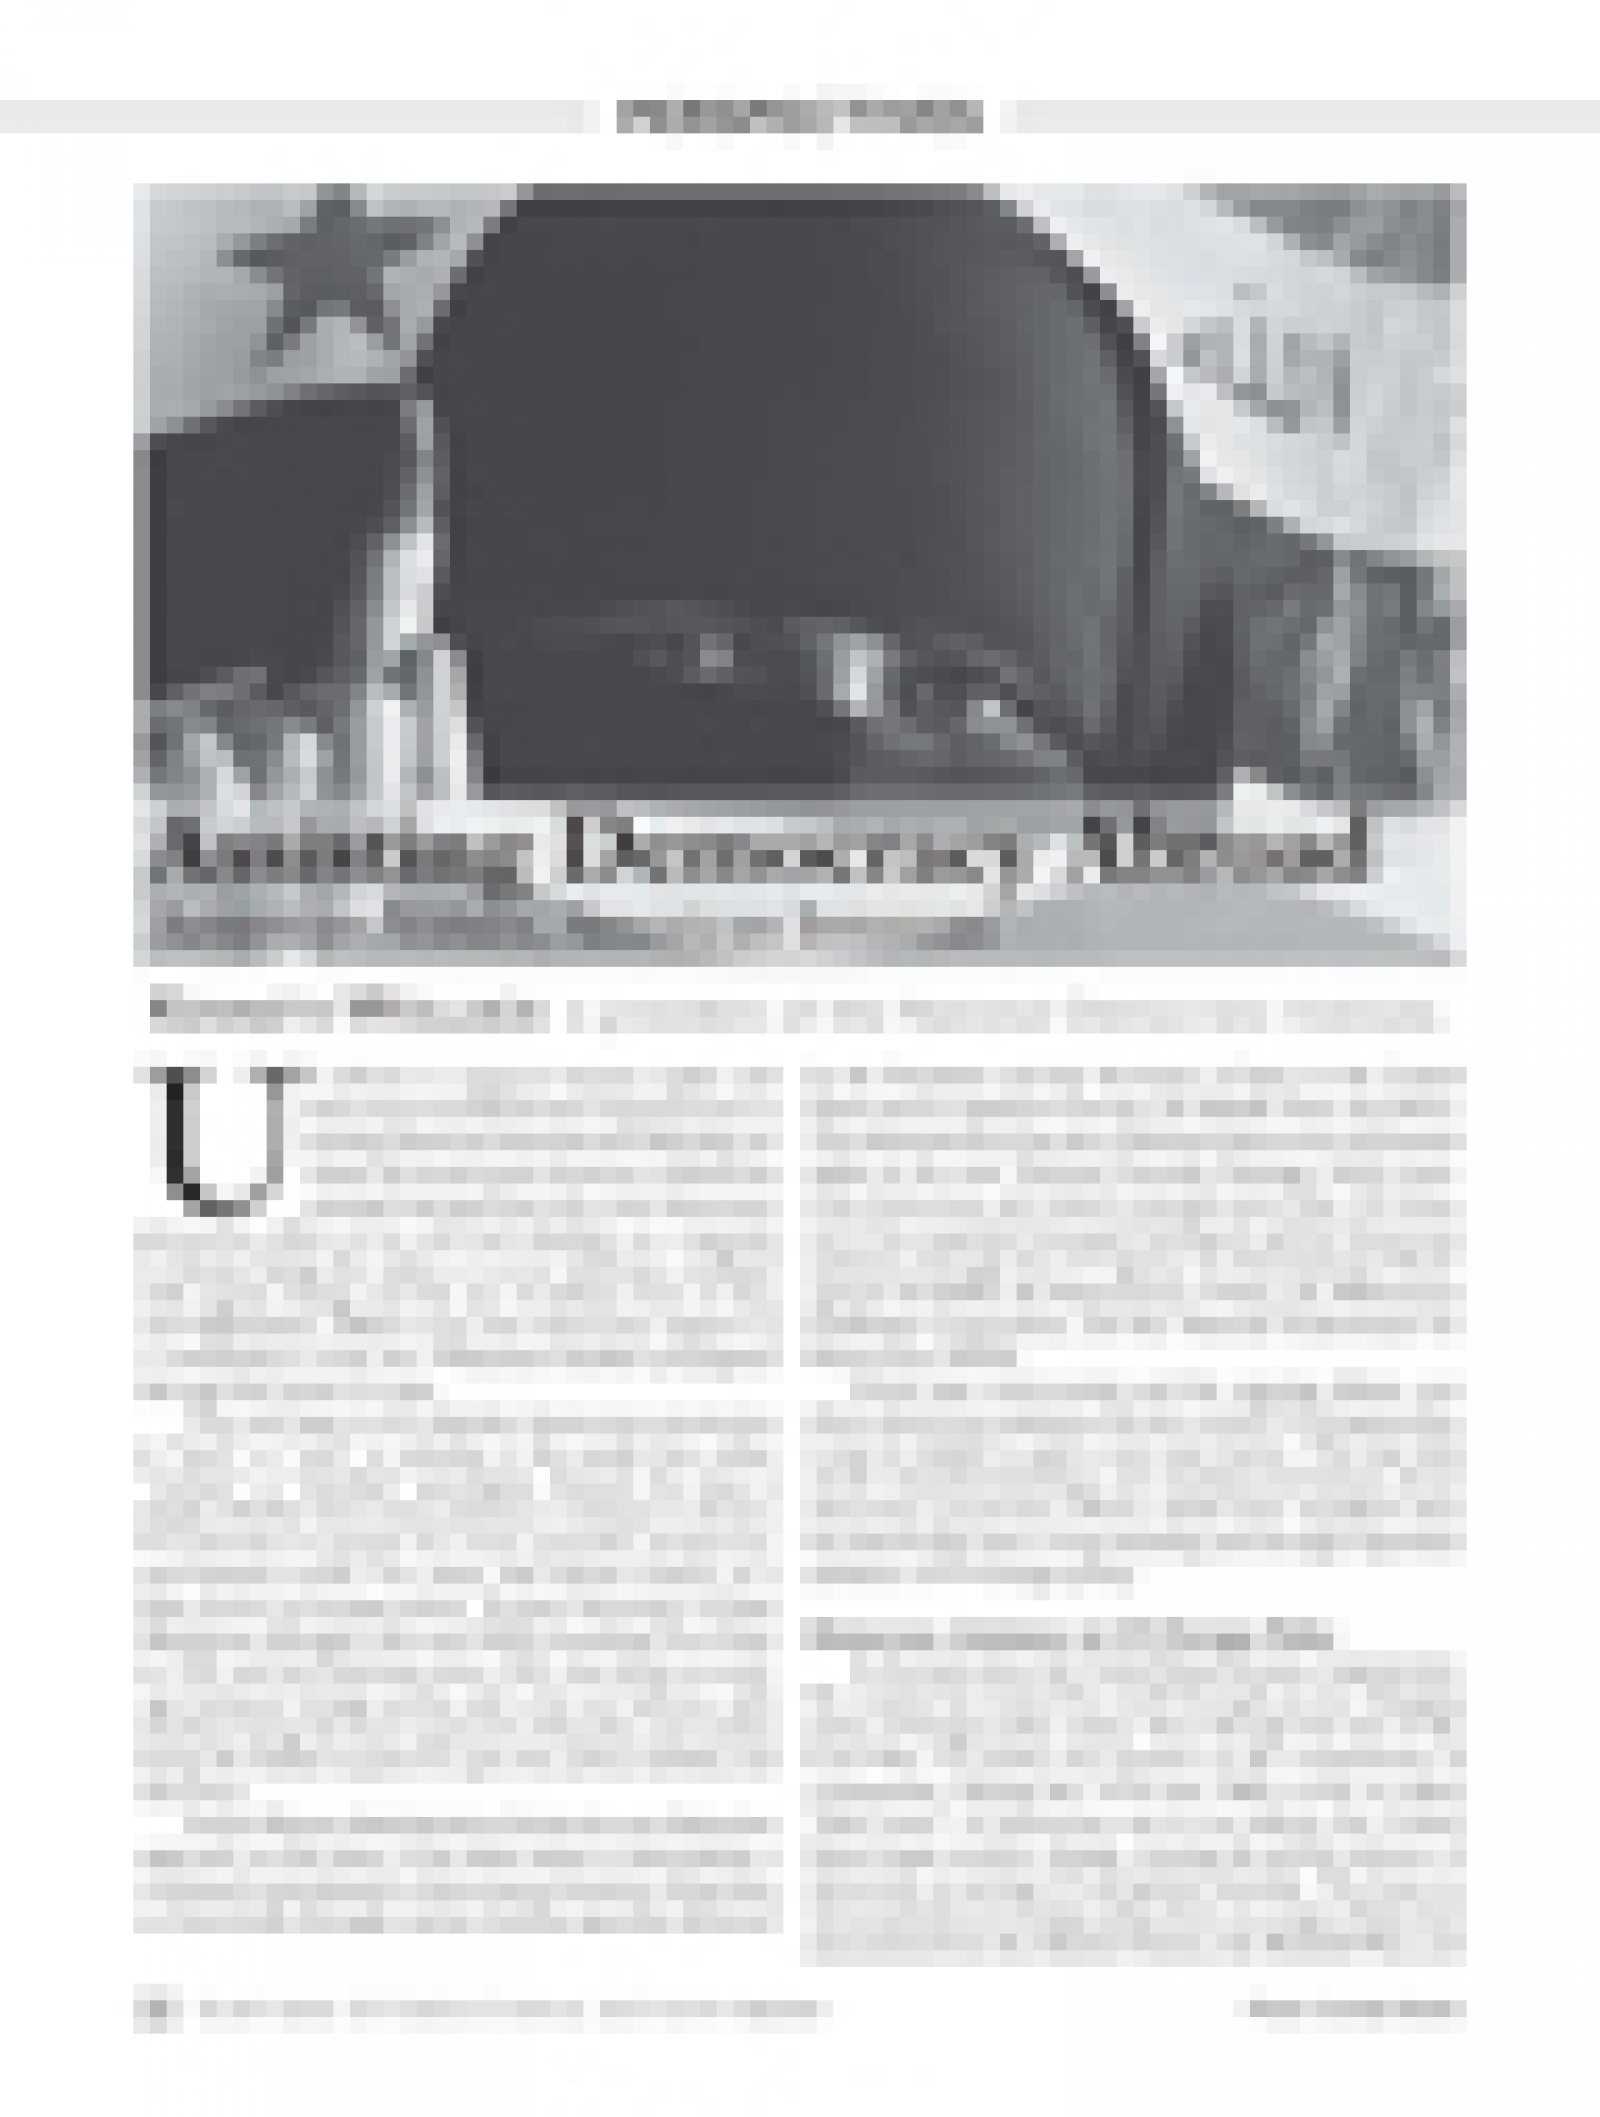 Our Perspectives: Assisting Democracy Abroad - American Values, American Interests